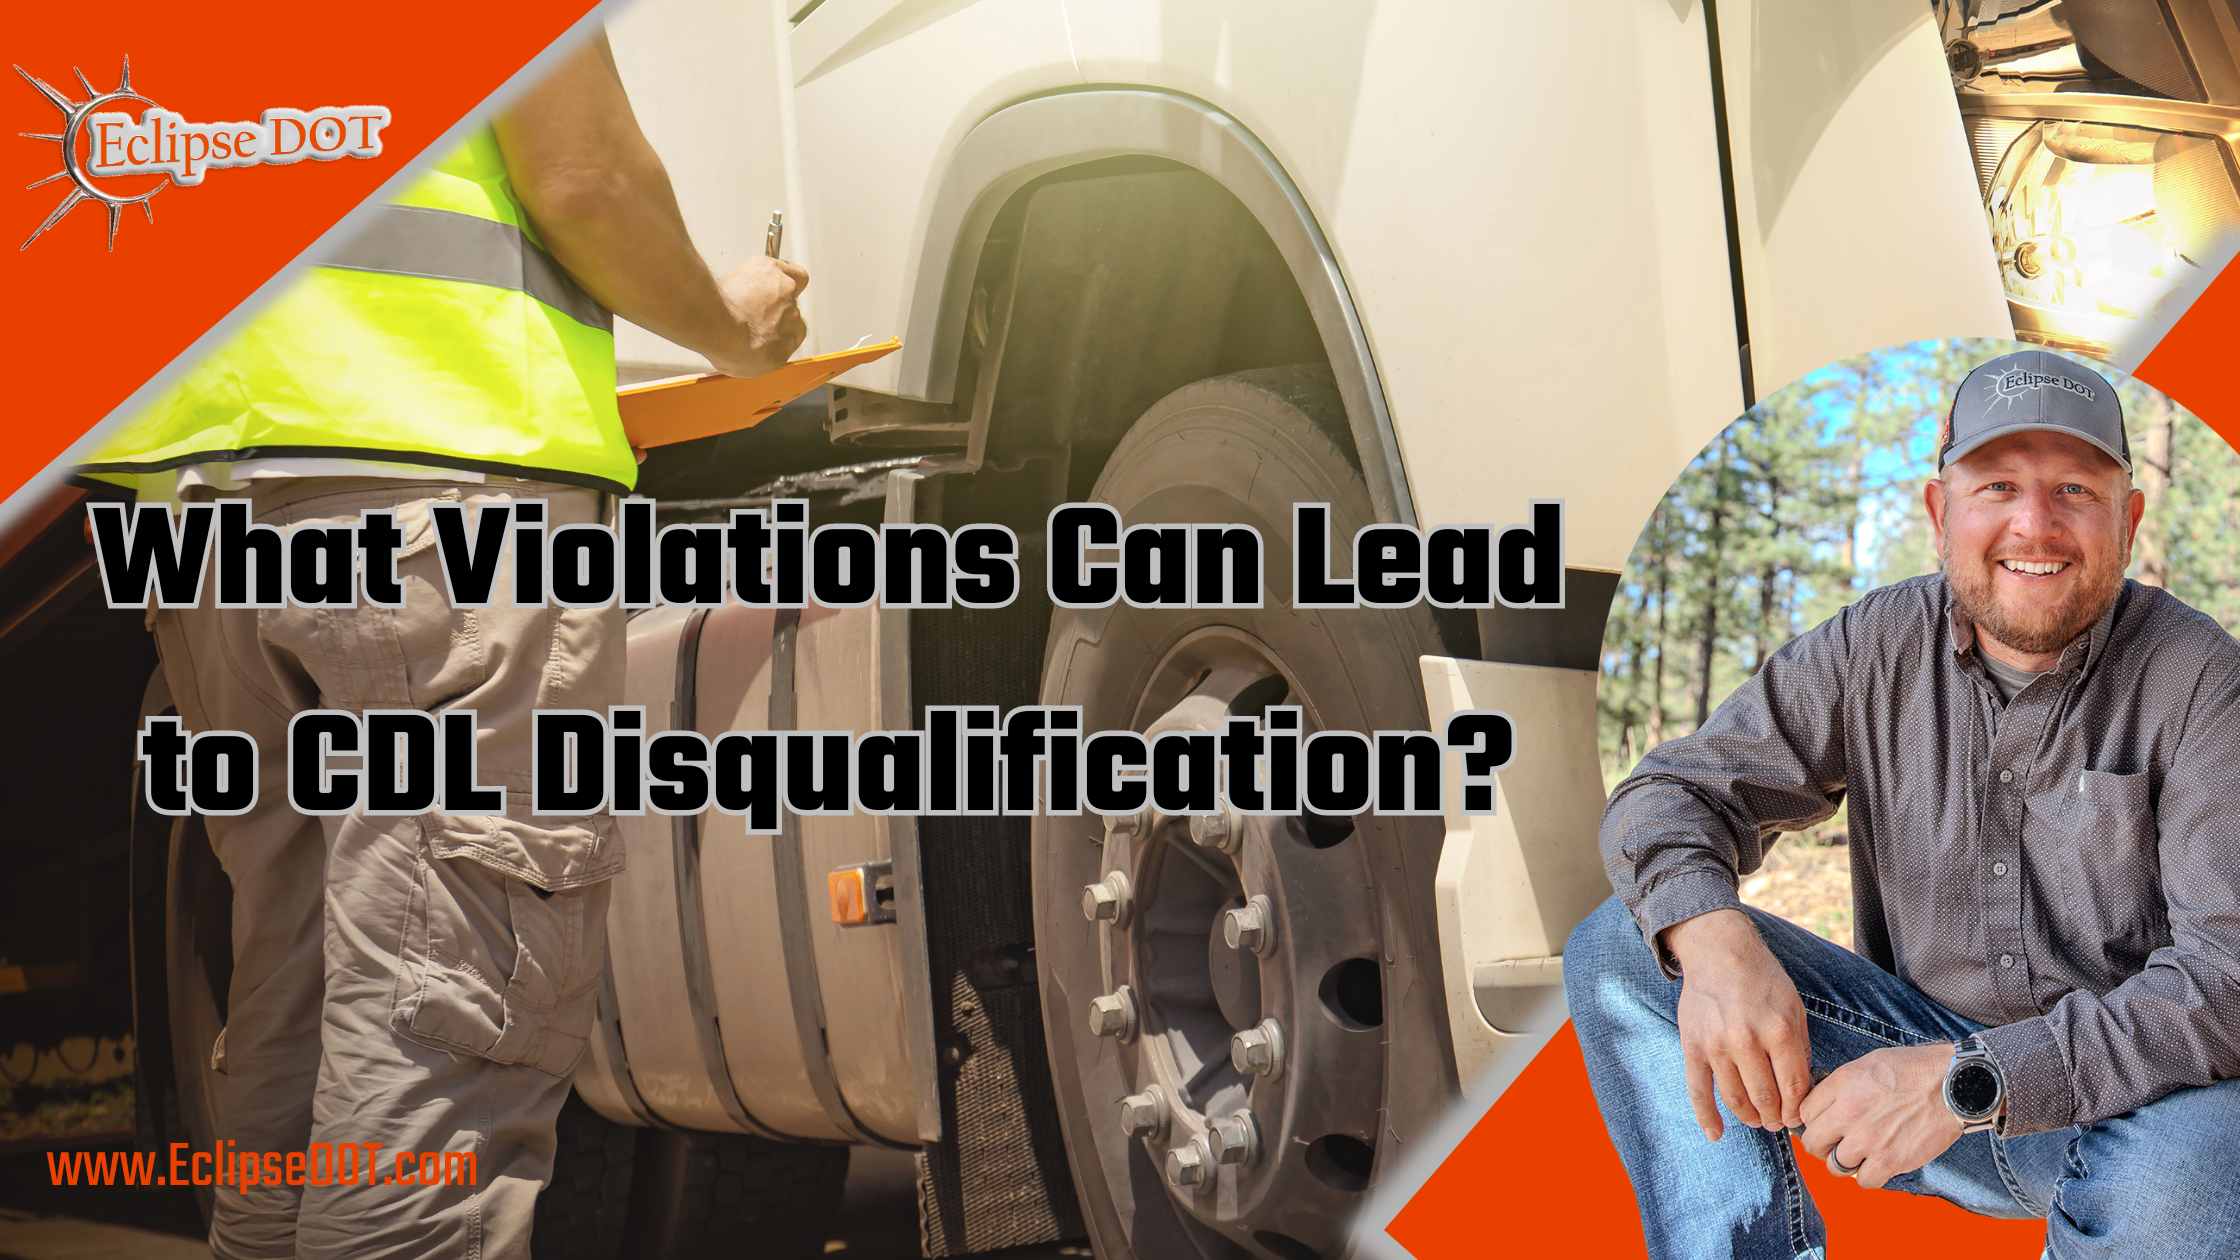 CDL Disqualification: Major Violations Impacting Commercial Driving Privileges